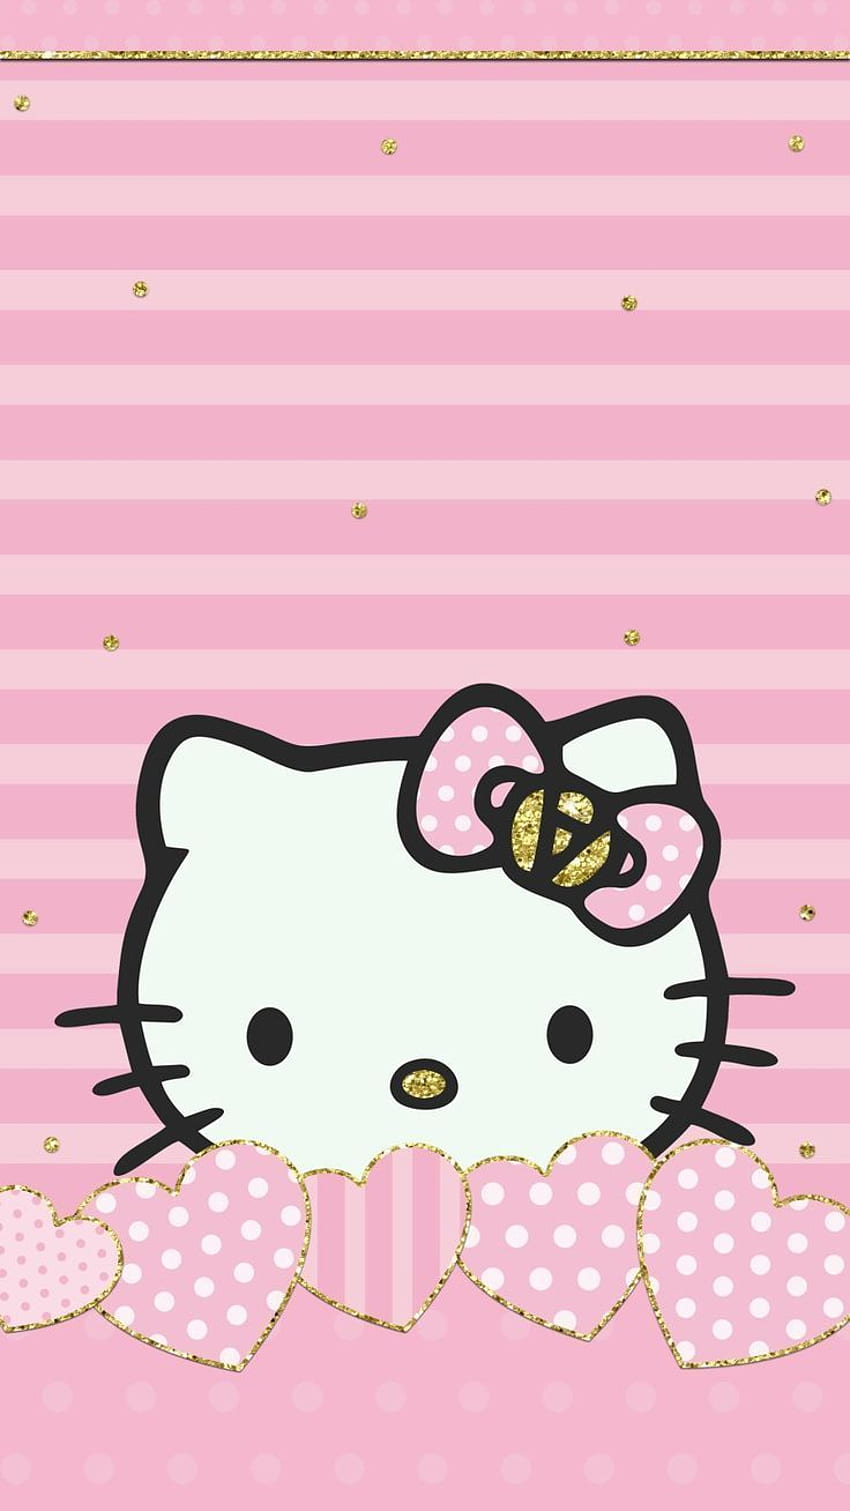 Pin by 恵 栗野 on キティちゃん  Hello kitty backgrounds, Hello kitty pictures, Hello  kitty images